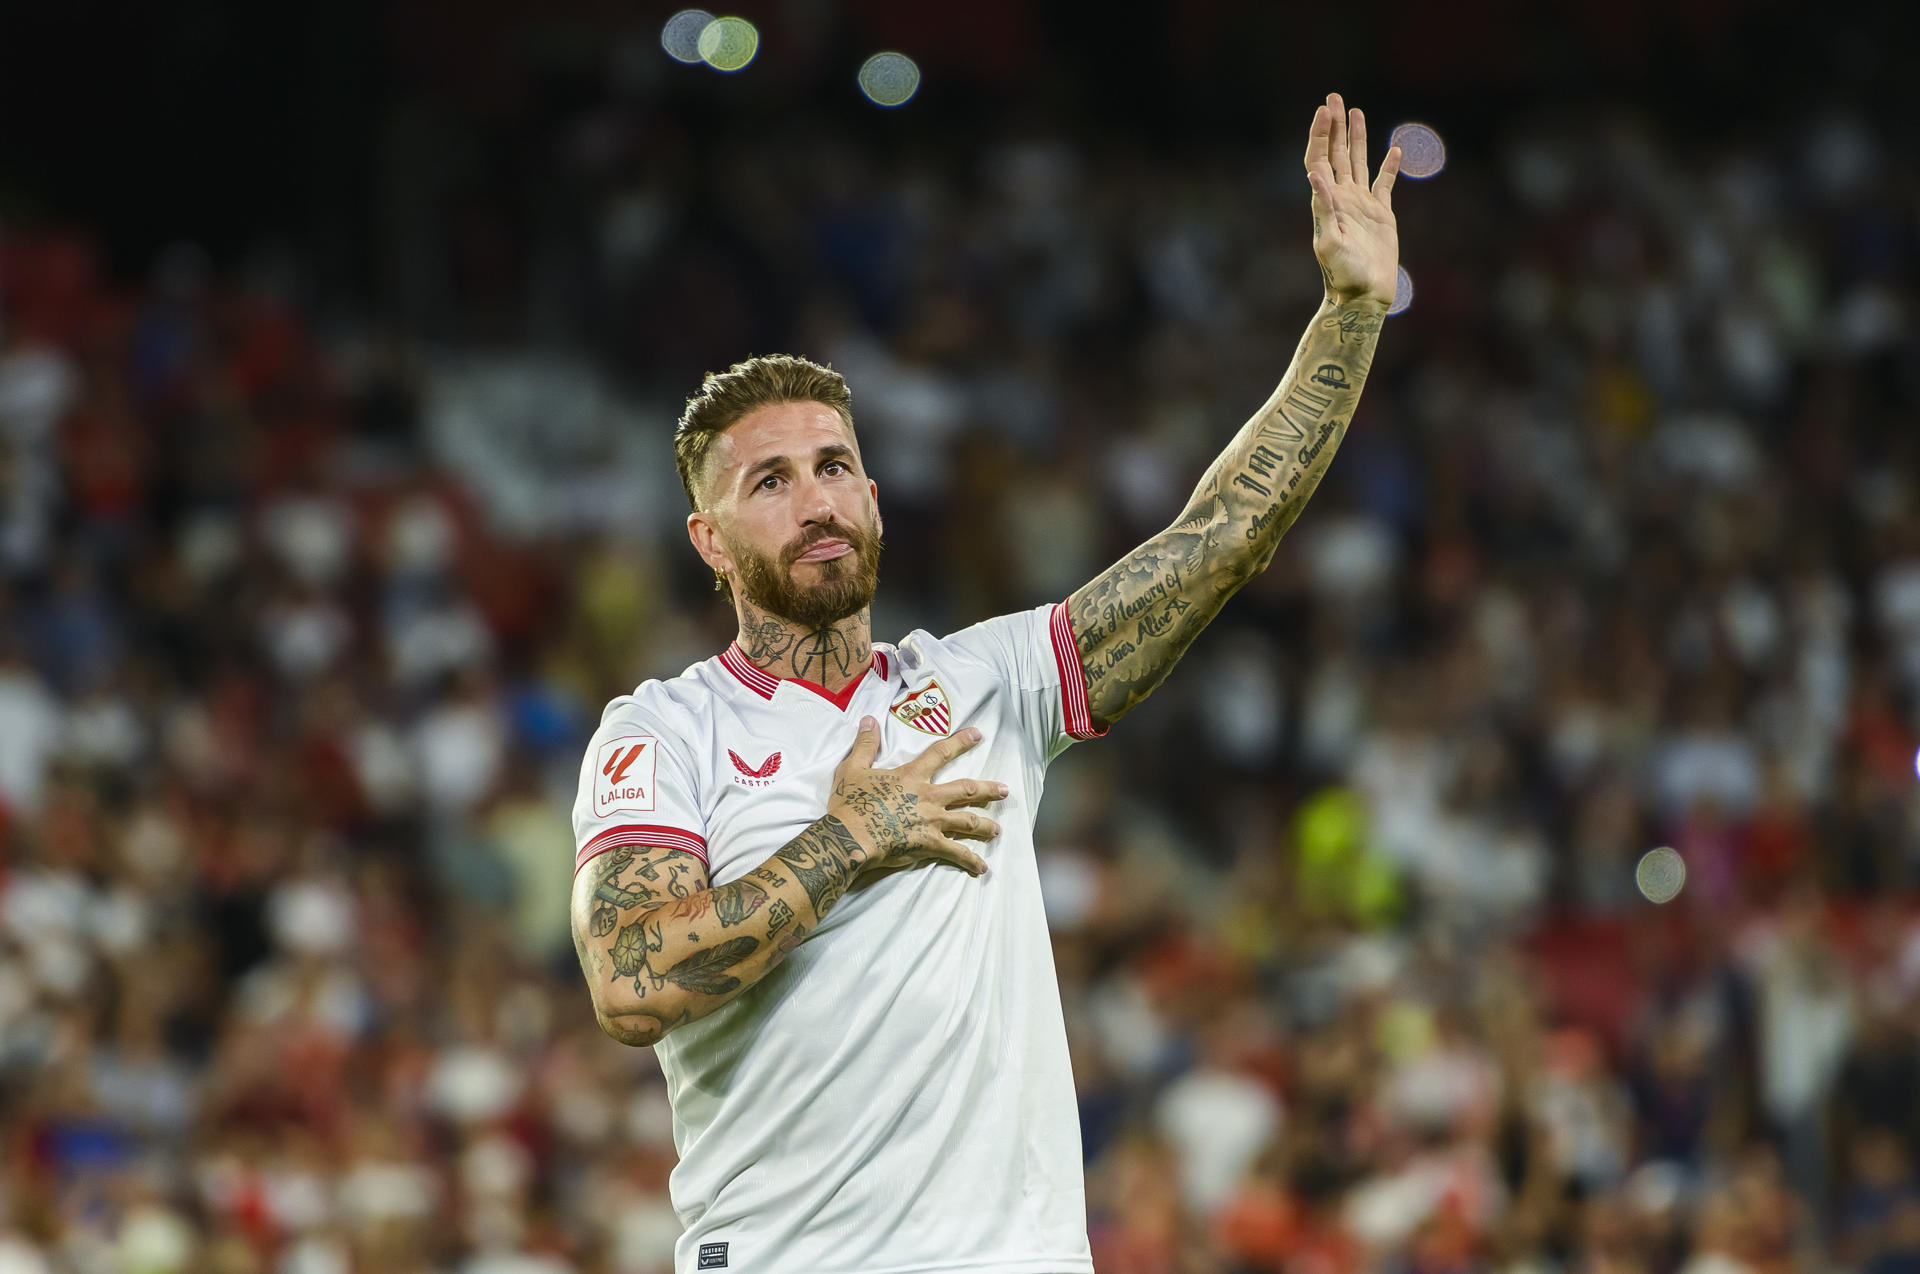 Ramos likely to miss Sevilla next games as he gets injured again